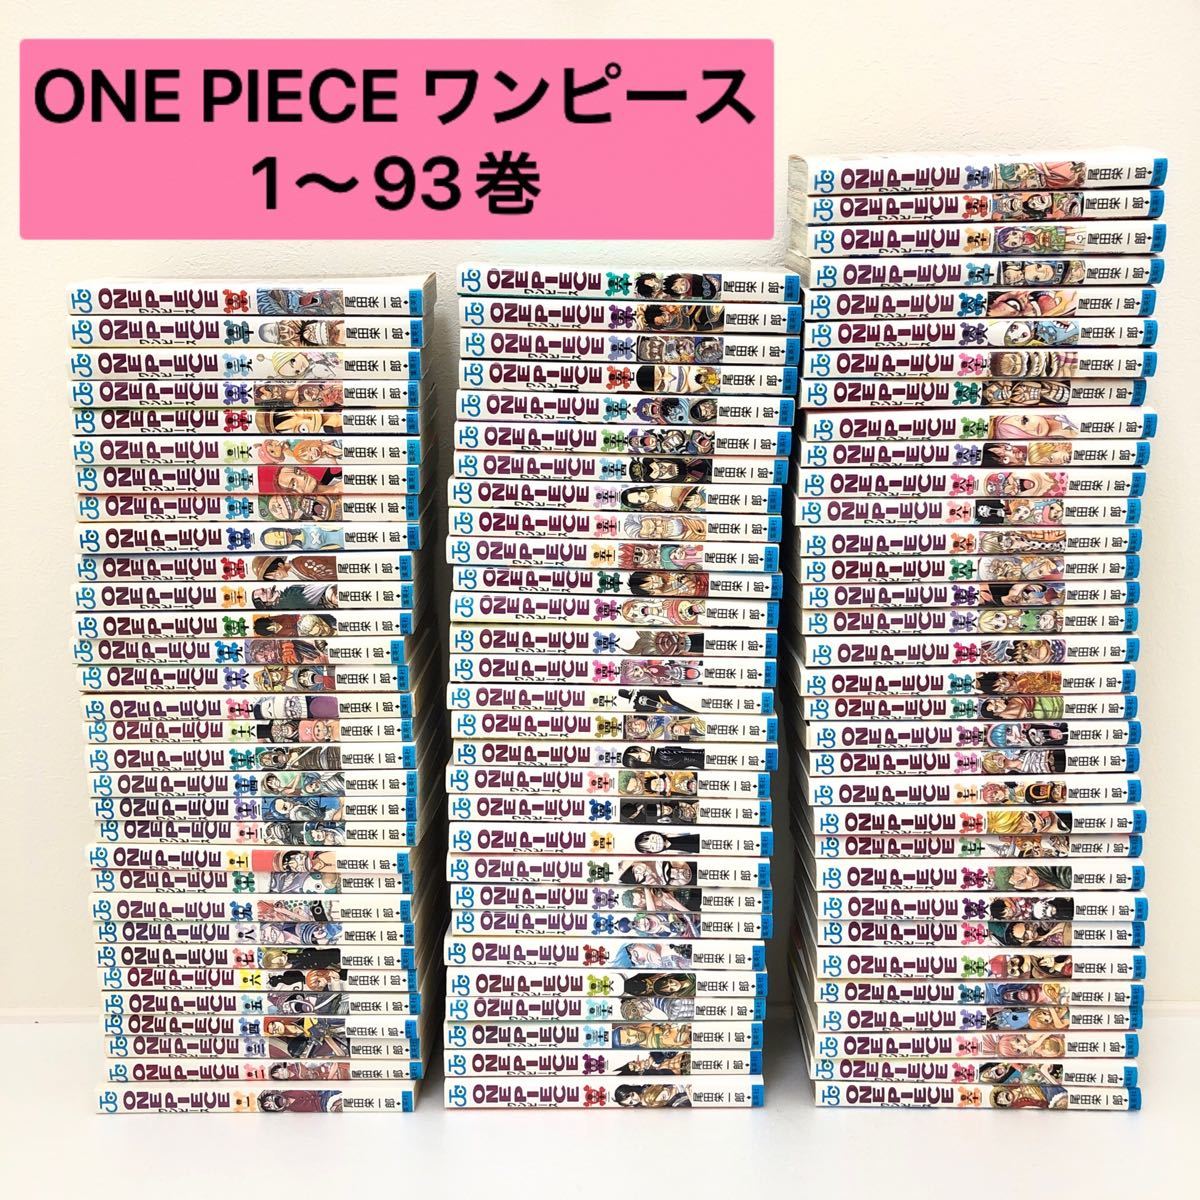 ONEPIECE ワンピース 1巻〜93巻セット 劇場特典2巻